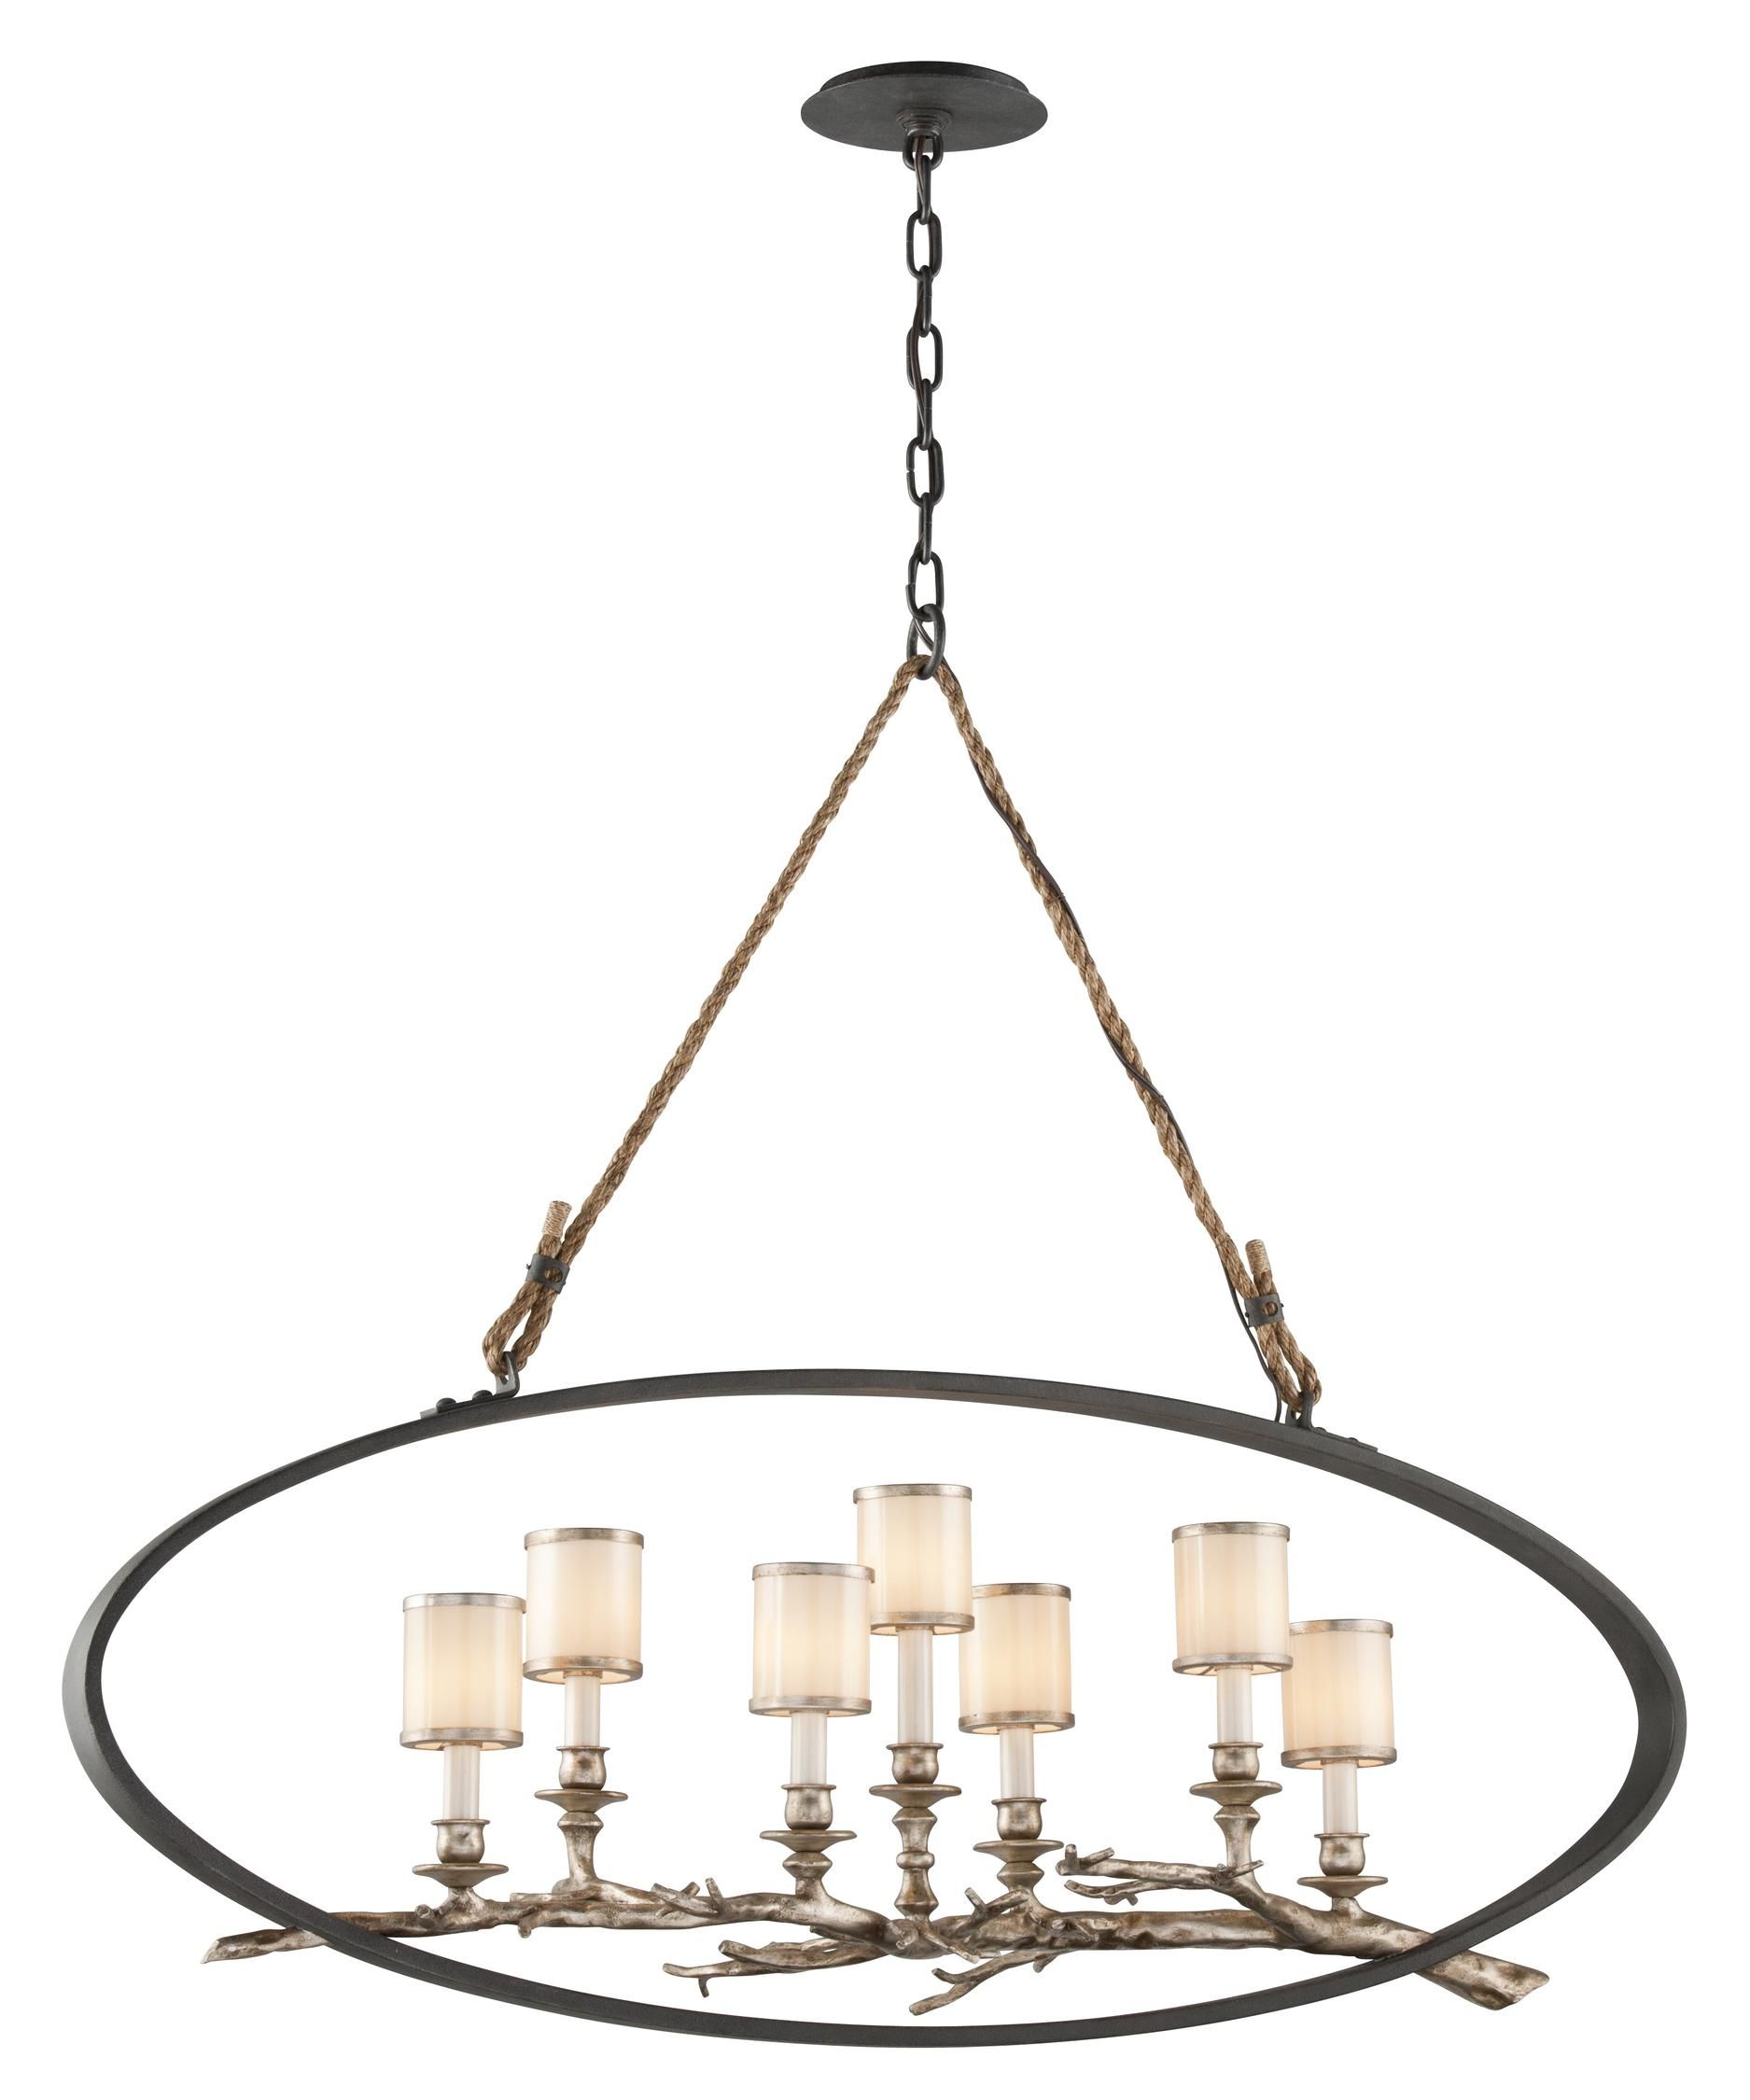 Troy Lighting F3447 Drift 44 Inch Wide 7 Light Chandelier With Regard To 7 Light Chandeliers (View 15 of 25)